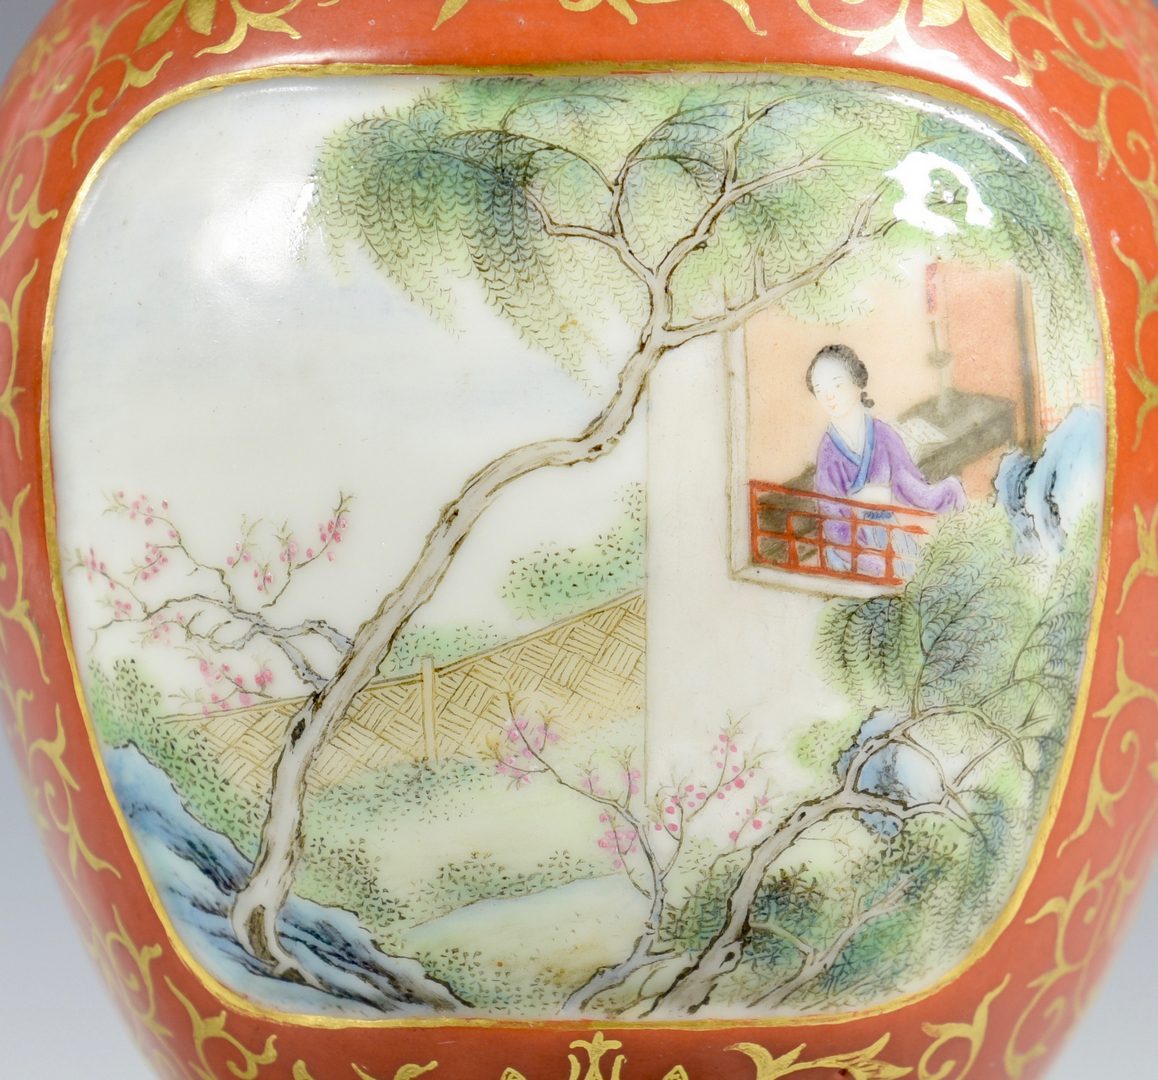 Lot 21: Pr. Chinese Porcelain Wall Pockets